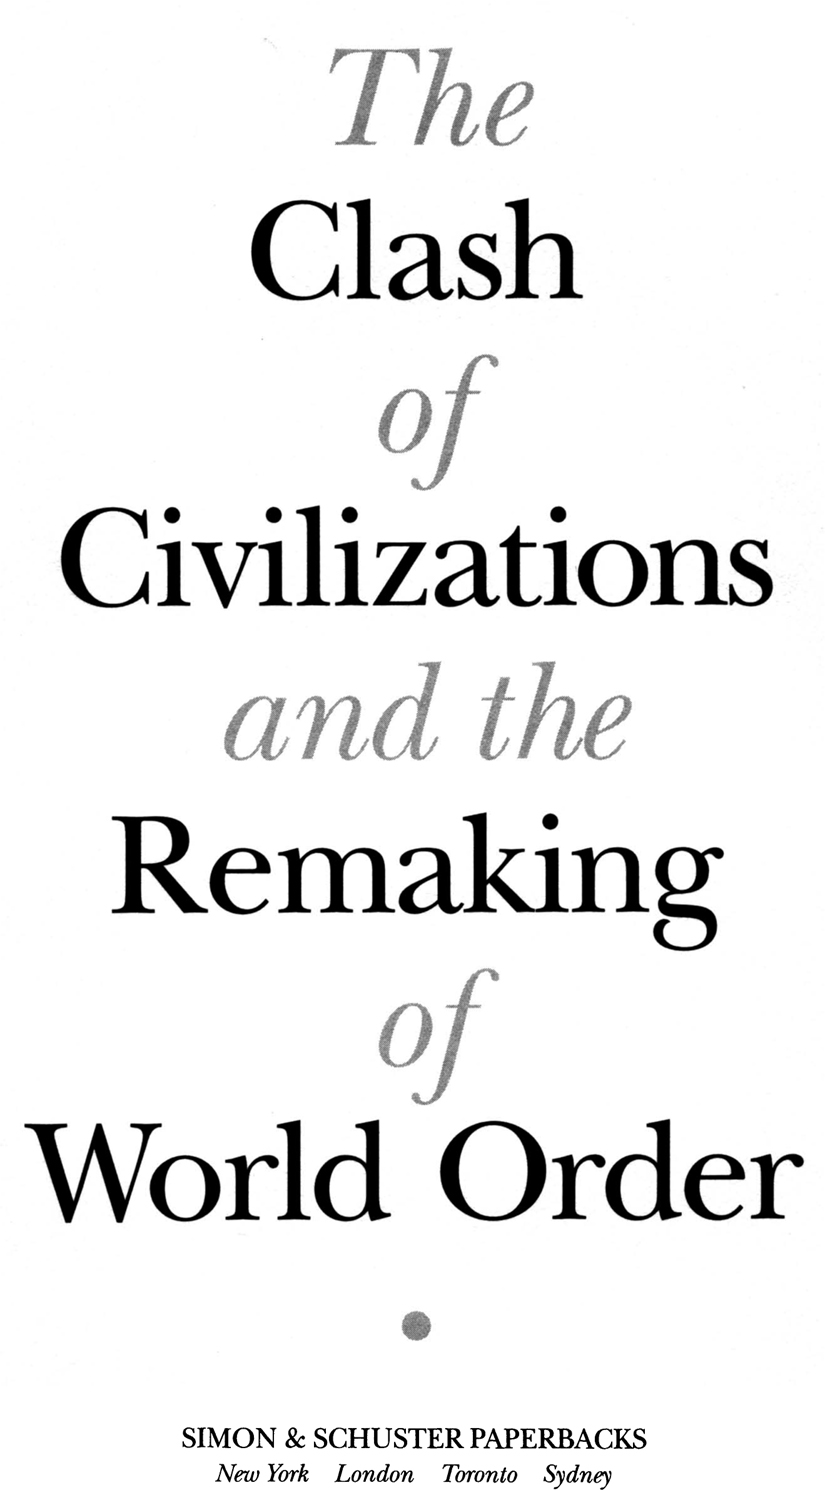 The clash of civilizations and the remaking of world order - image 2